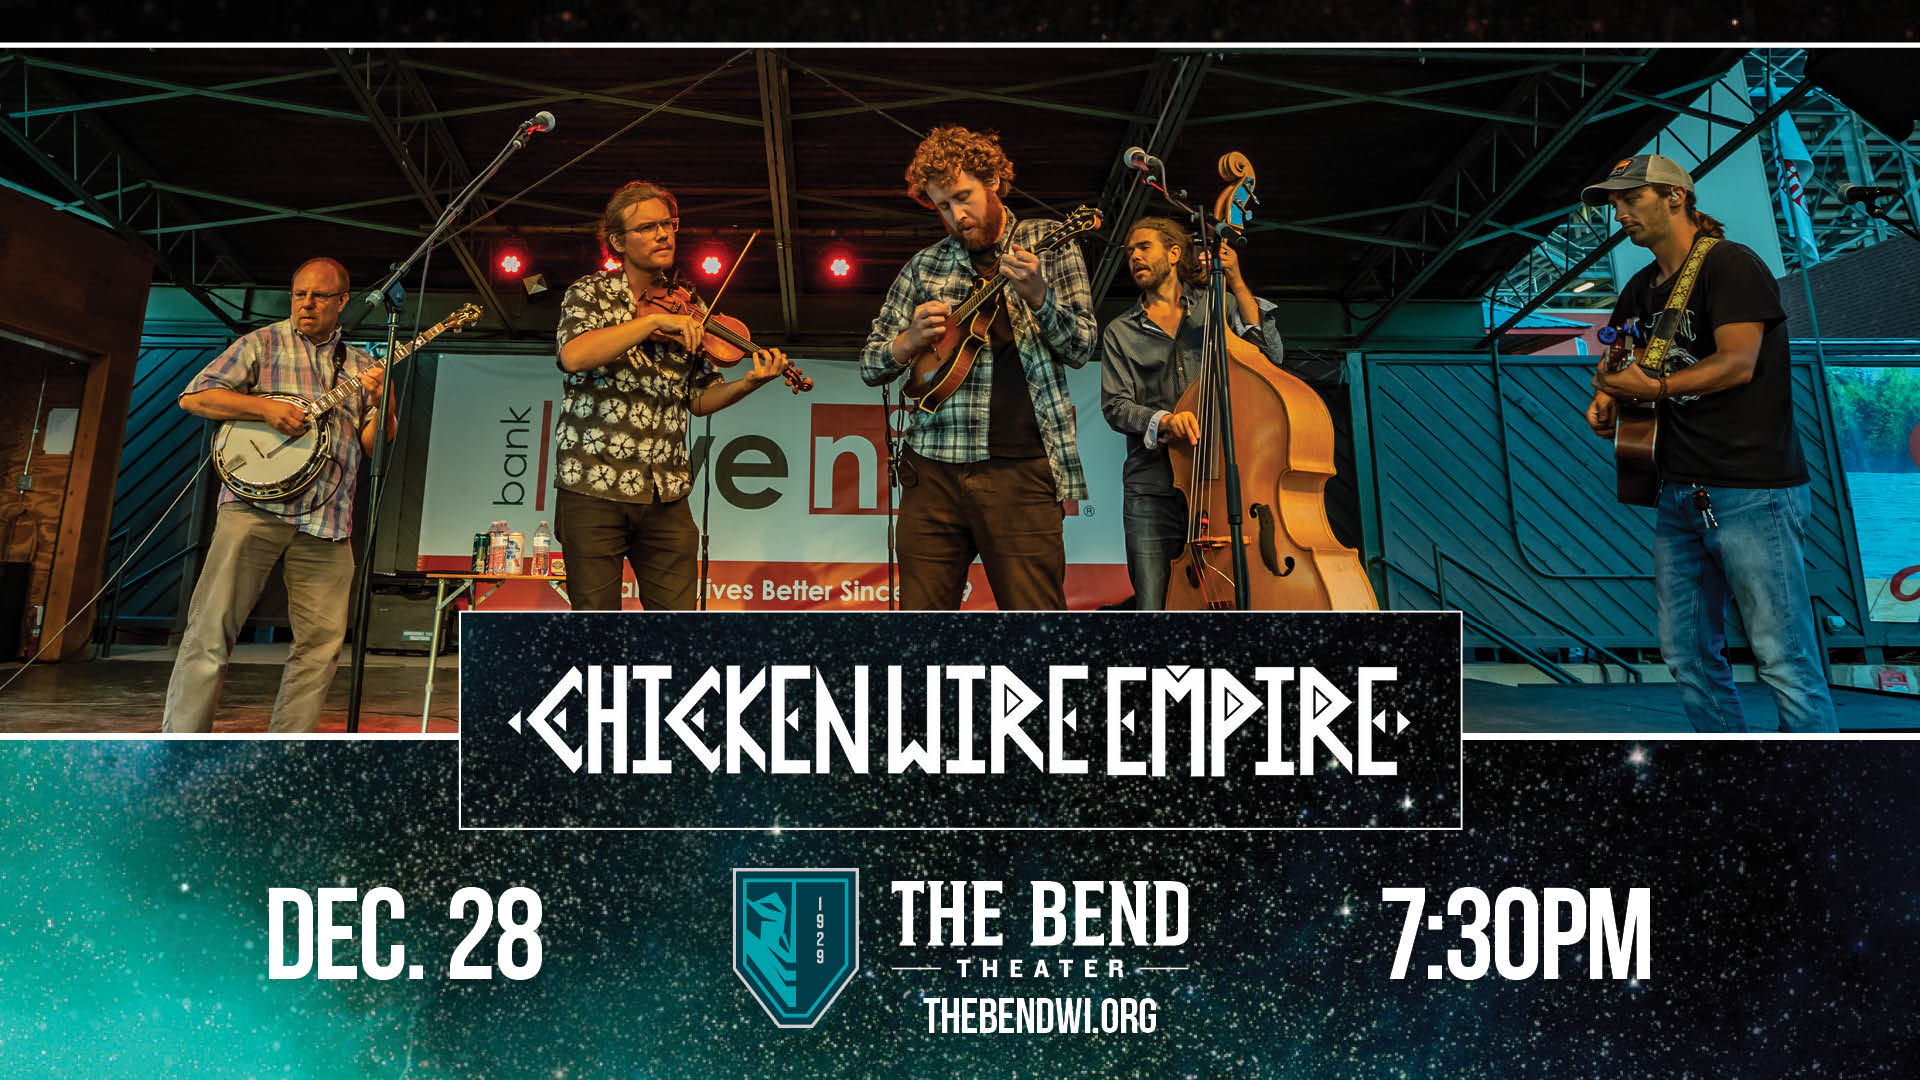 Chickenwire Empire Live at The Bend Theater